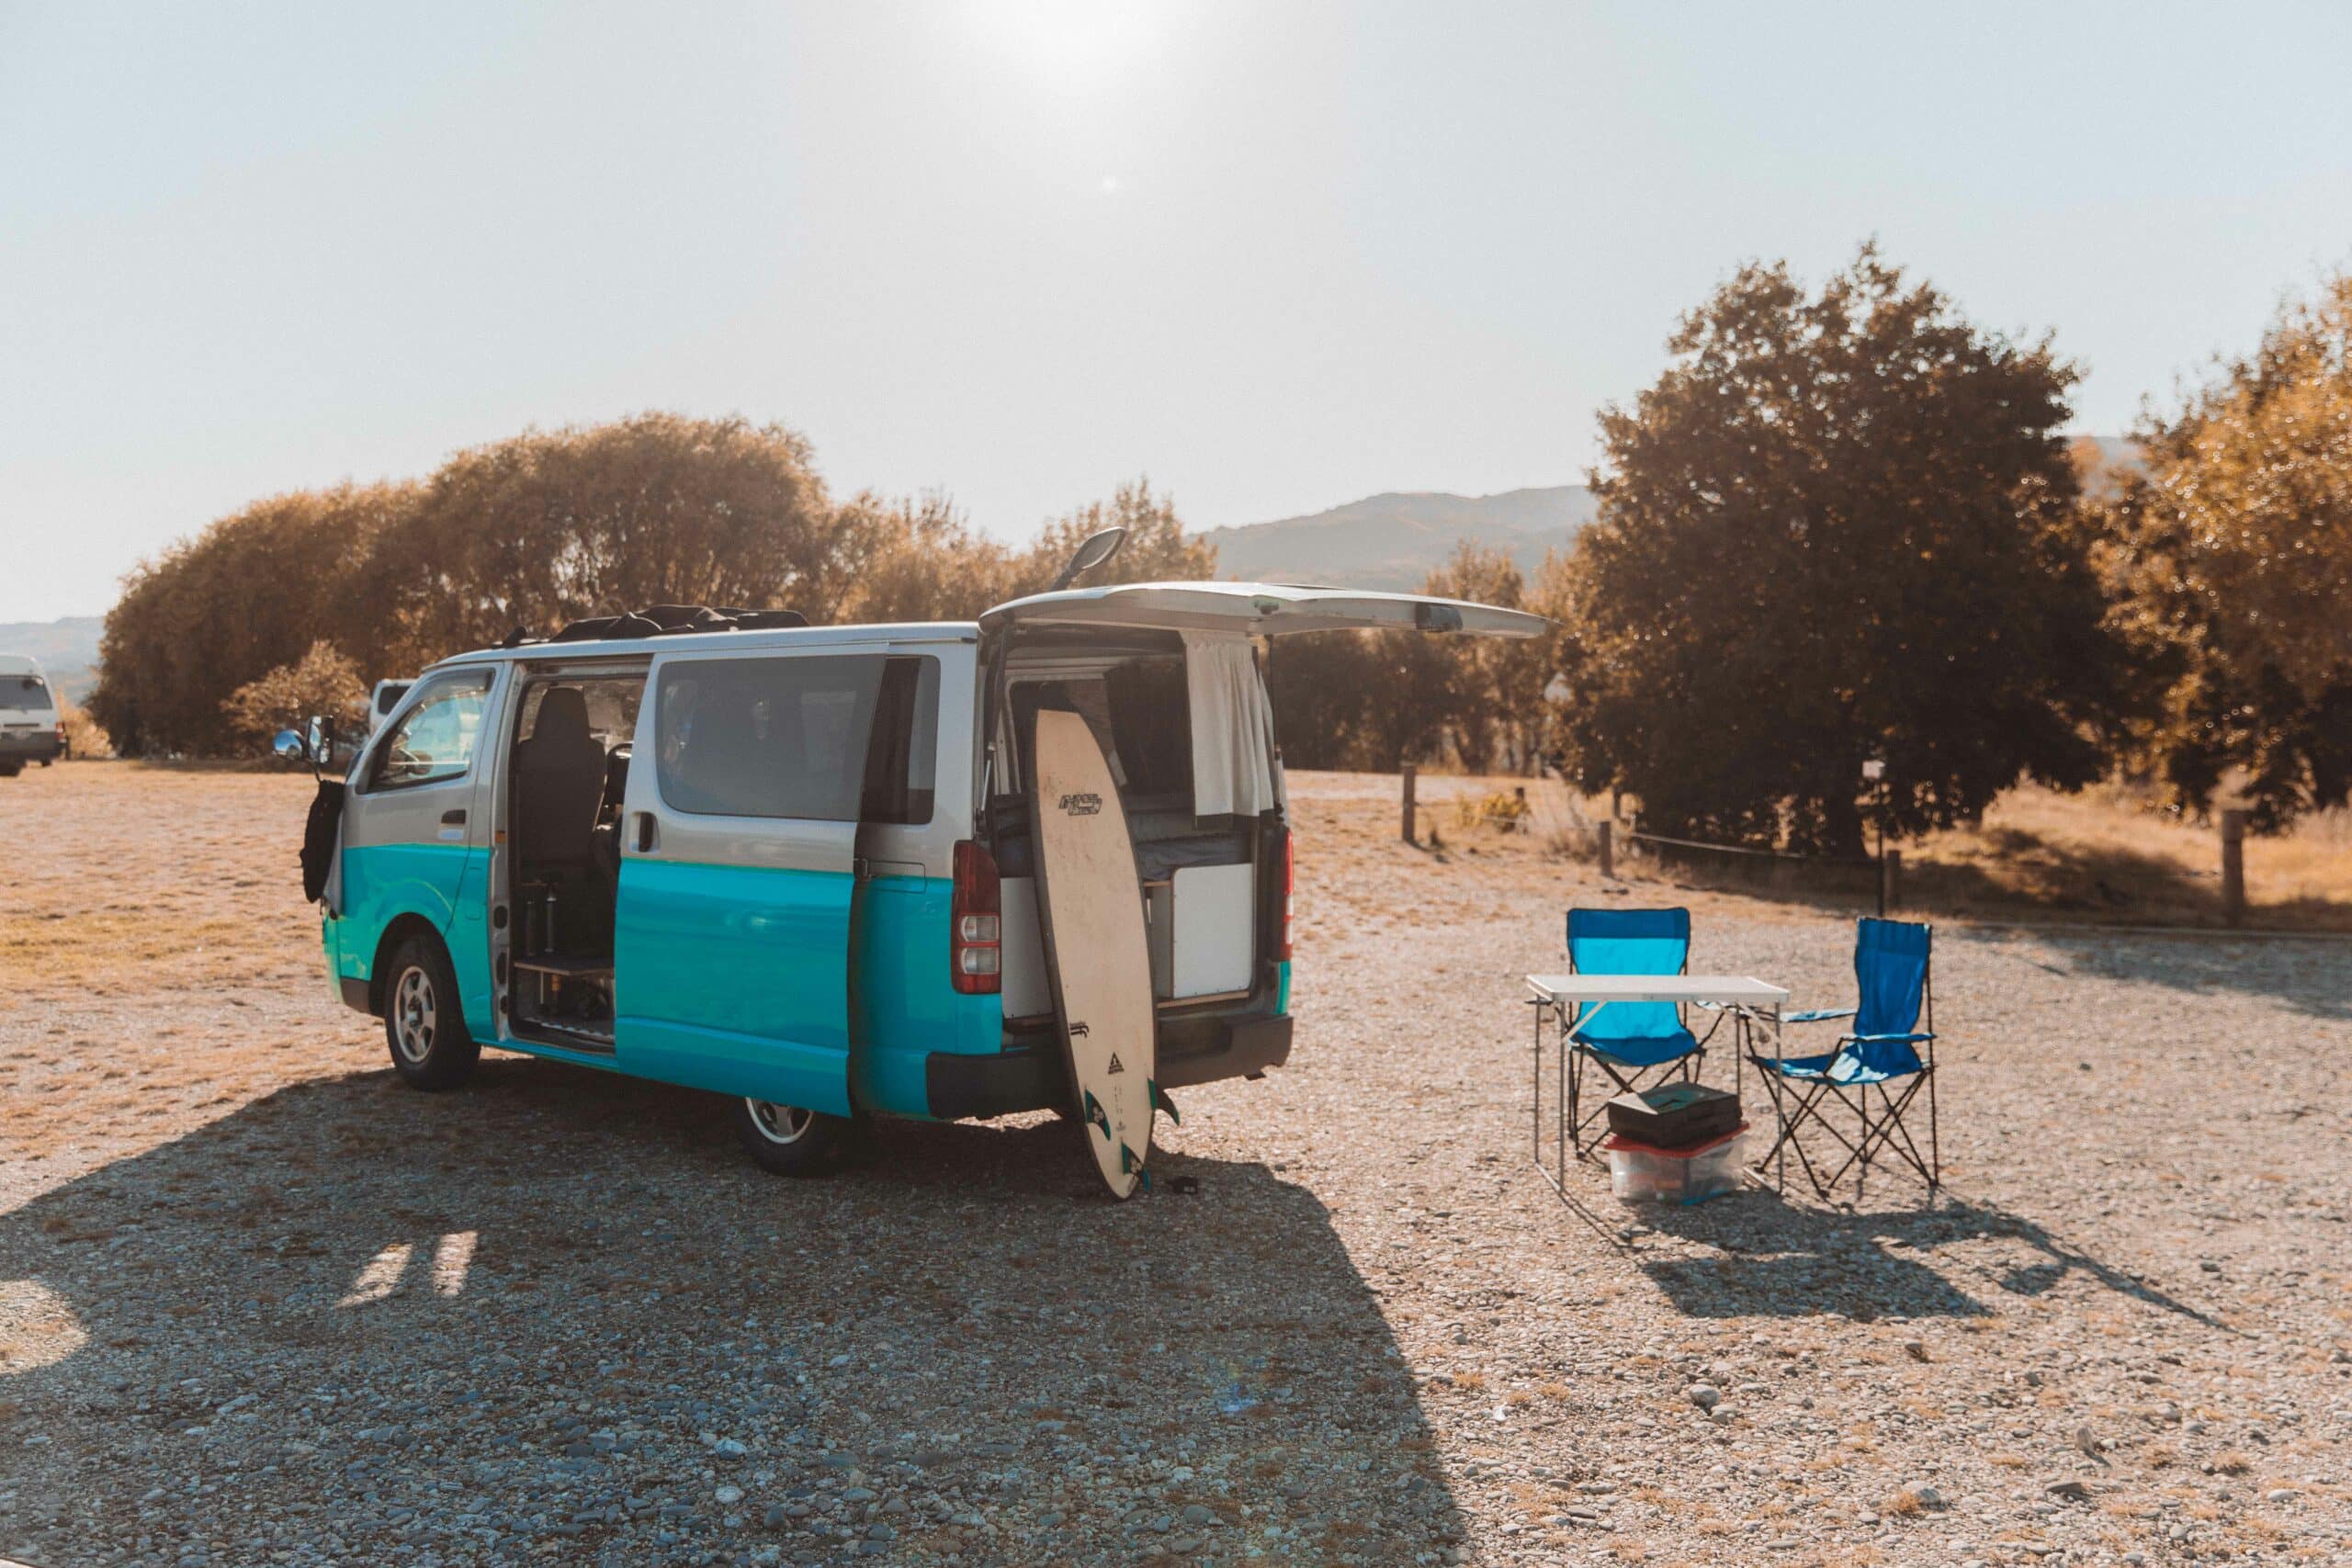 Parked camper in remote area with surfboard, table and chairs.